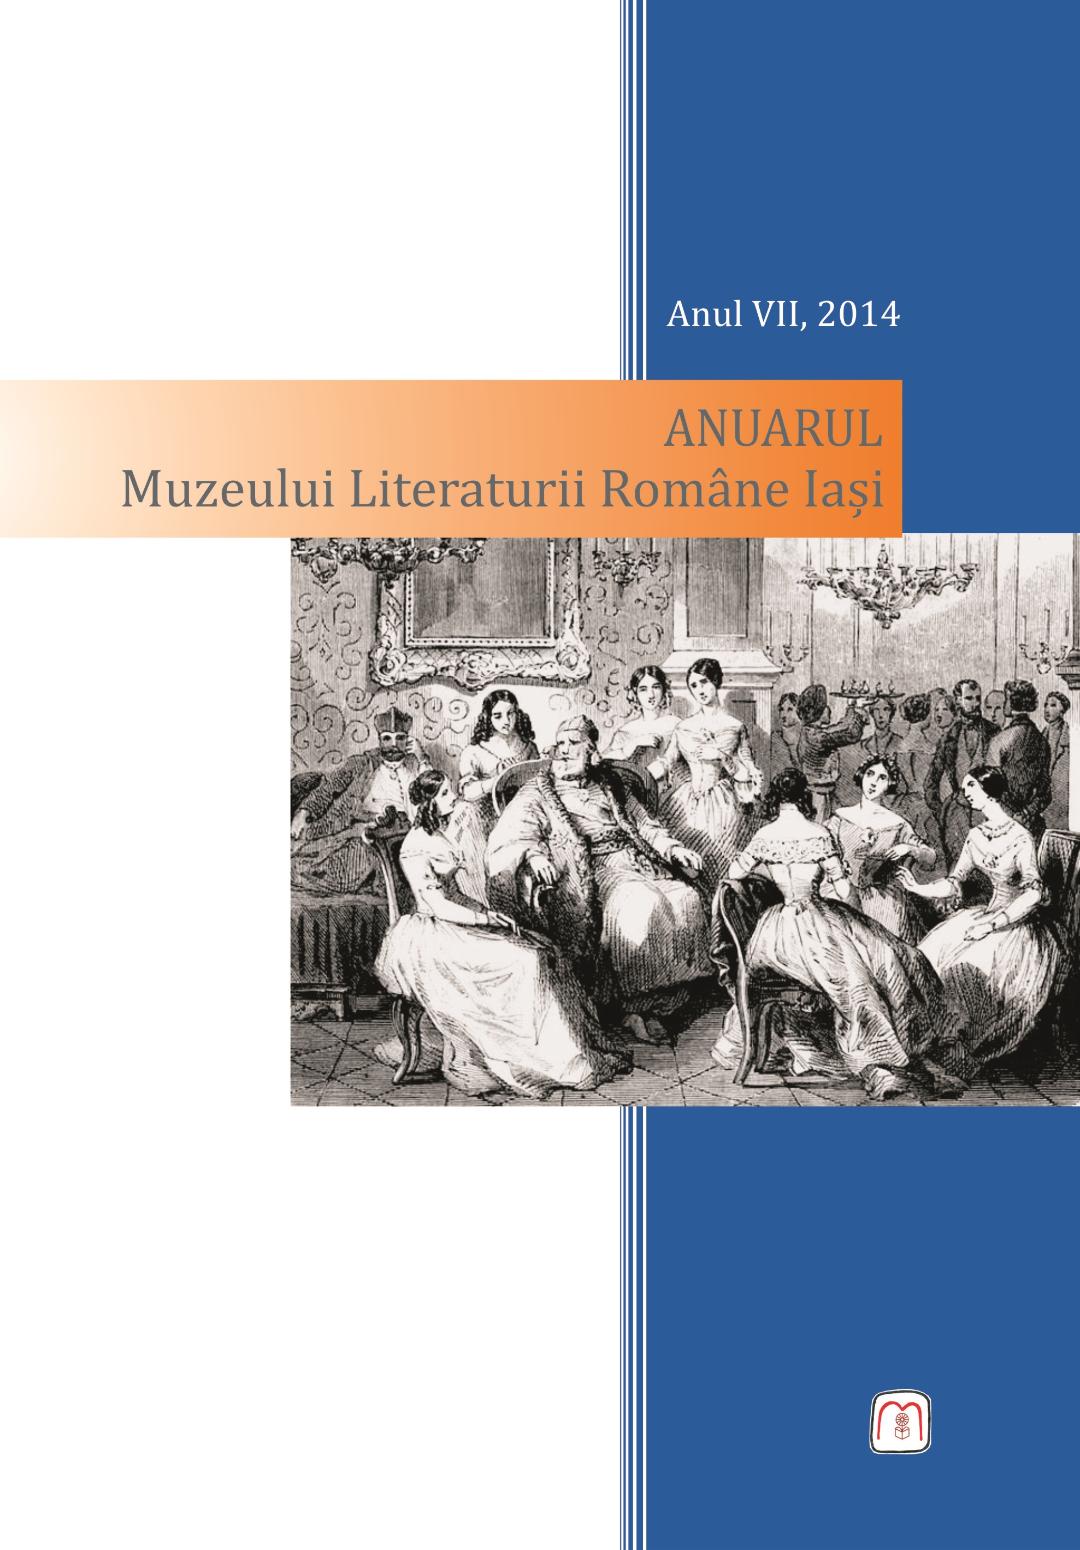 Yearbook of the laşi National Museum of Romanian Literature Cover Image